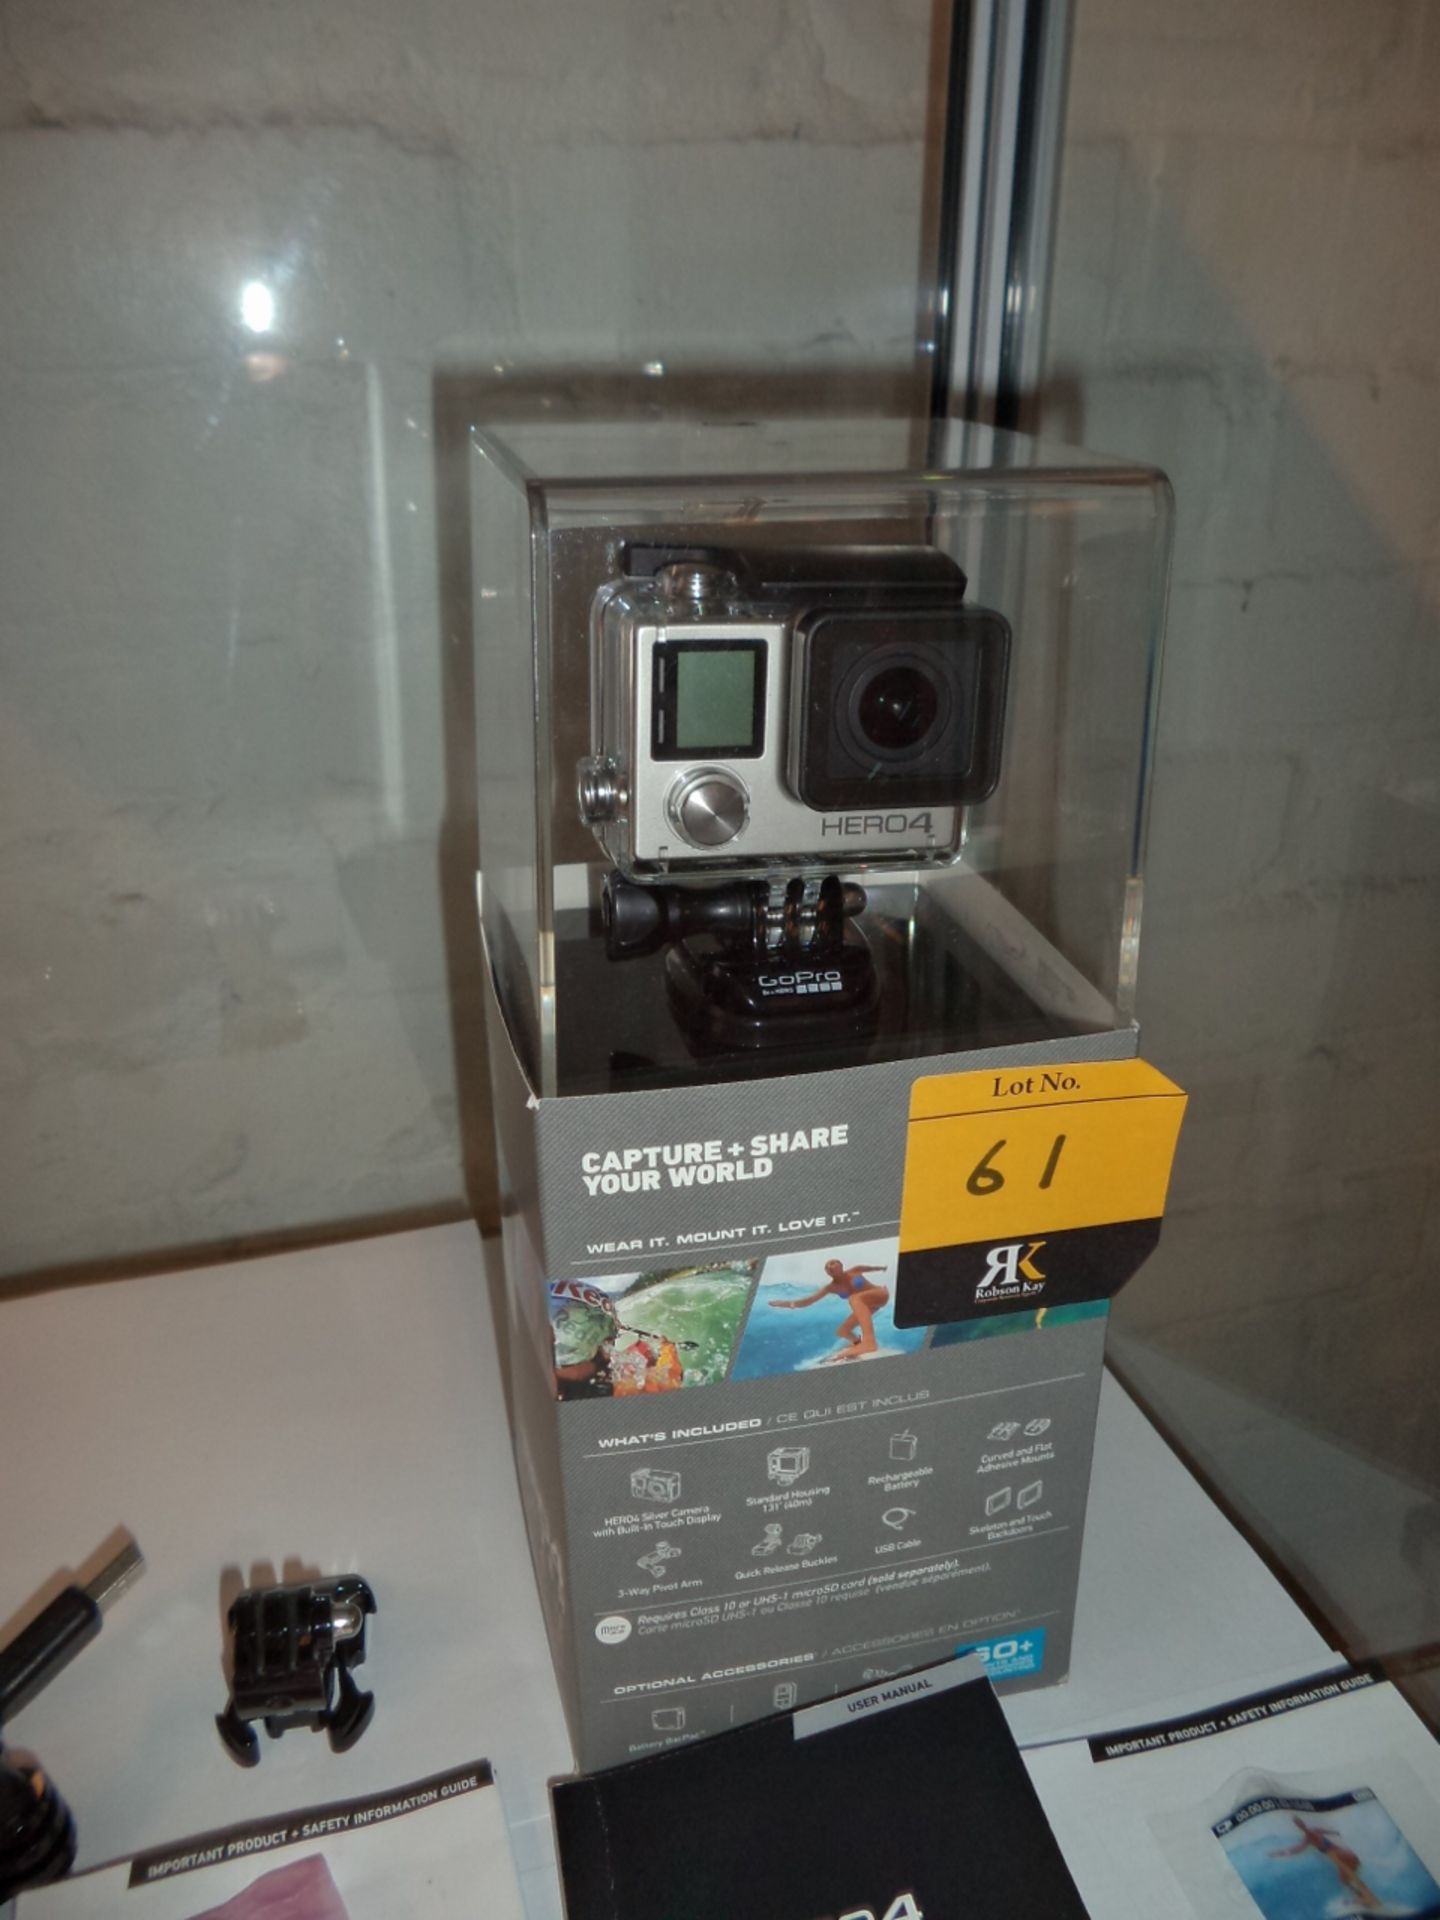 GoPro HERO4 Silver edition action video camera with built-in touchscreen display, box, manuals and